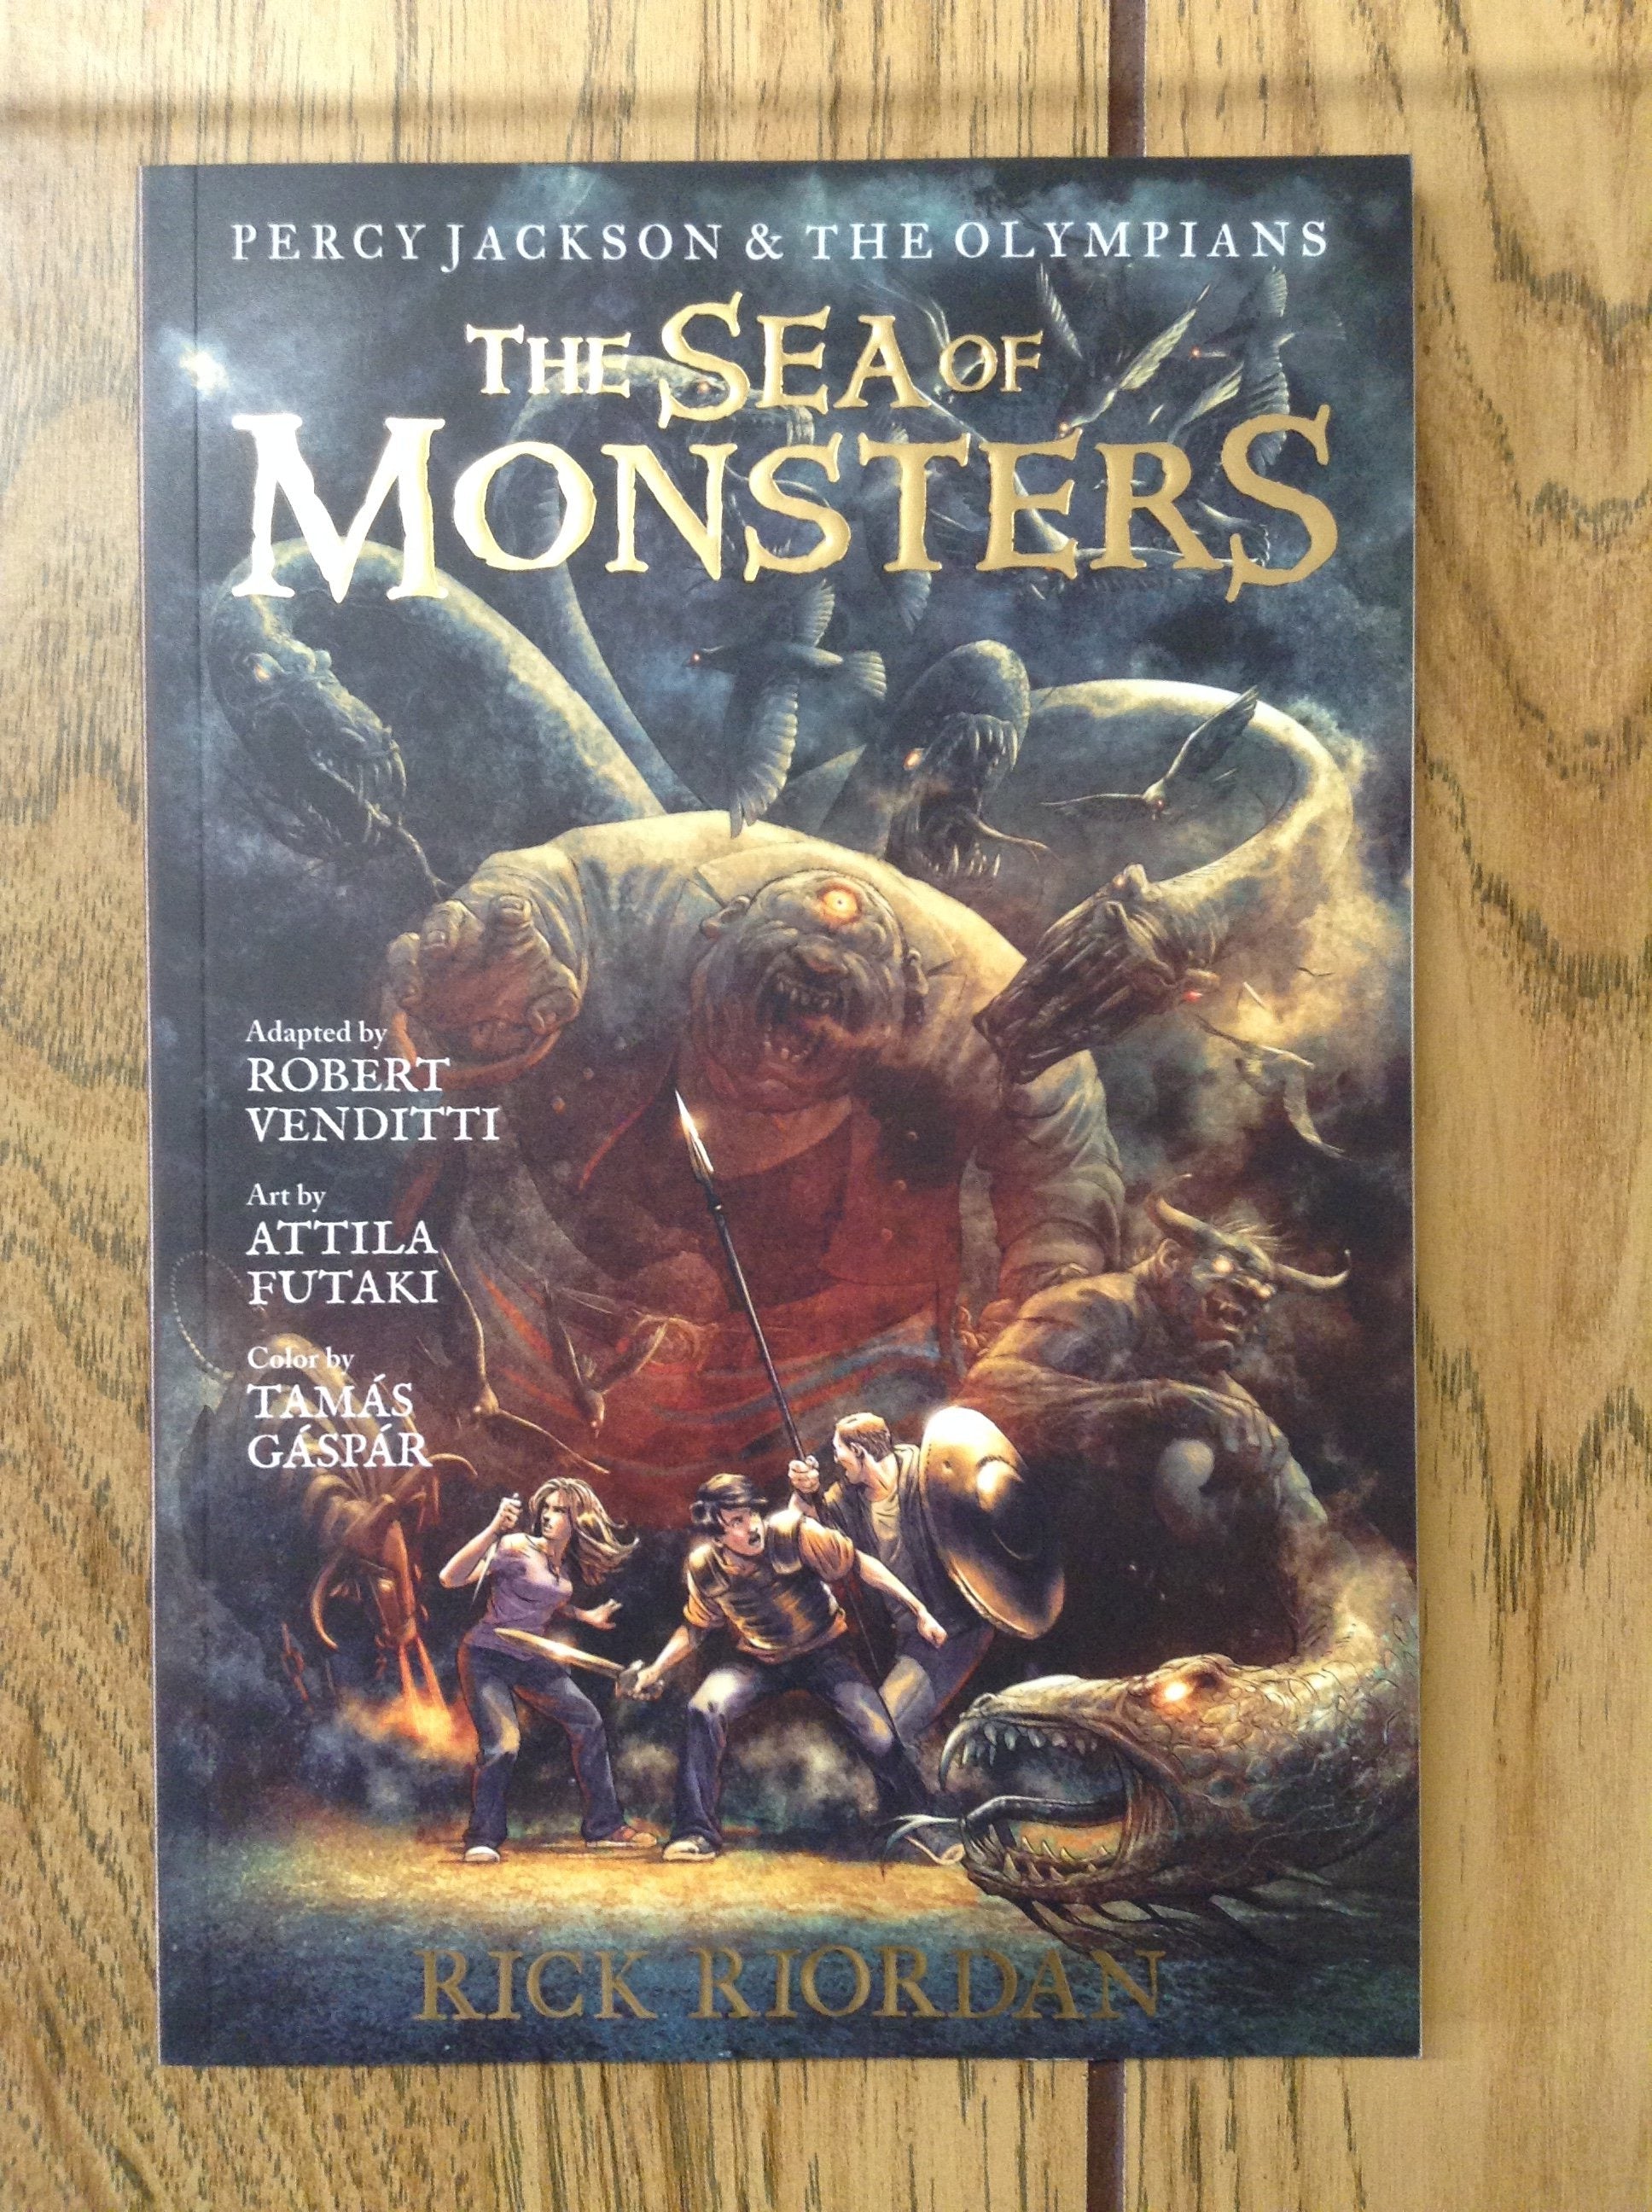 of　and　The　Olympians　Books　Graphic　Lucky's　Monsters:　Novel　Sea　–　the　Jackson　(Percy　The　Comics